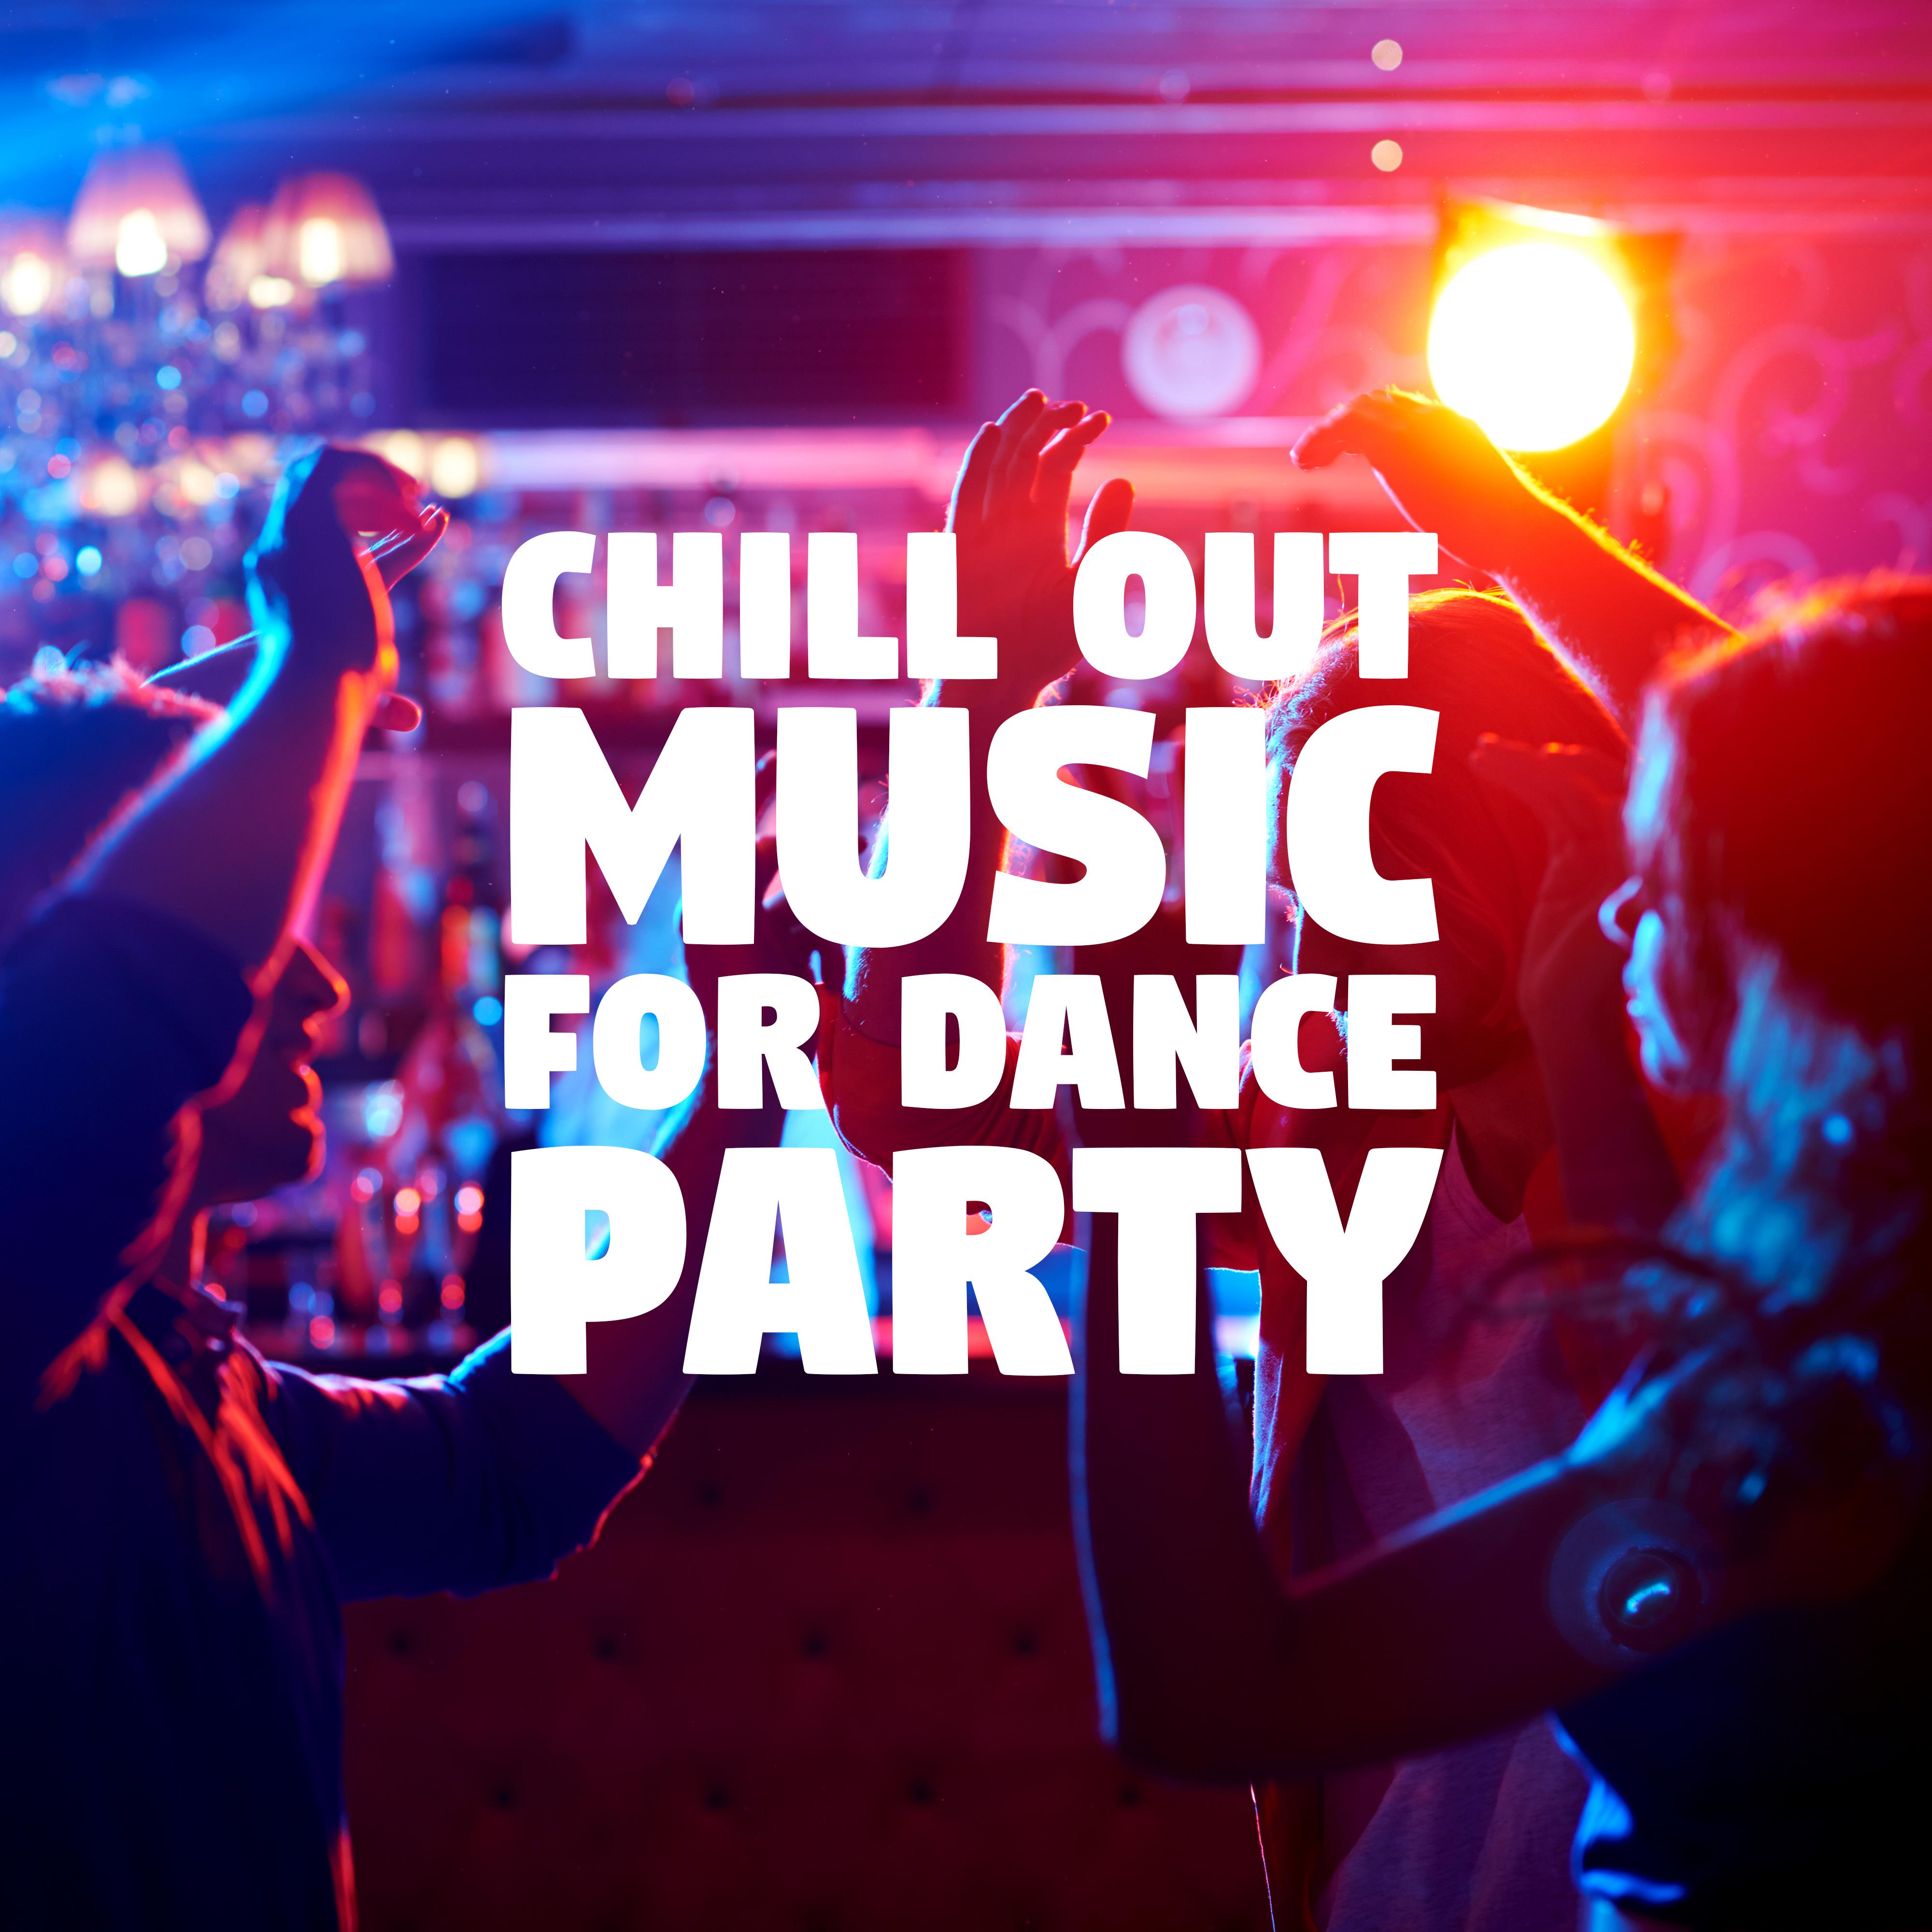 Chill Out Music for Dance Party  Best Dance Music, Have Fun, Drink Bar, Ibiza Party